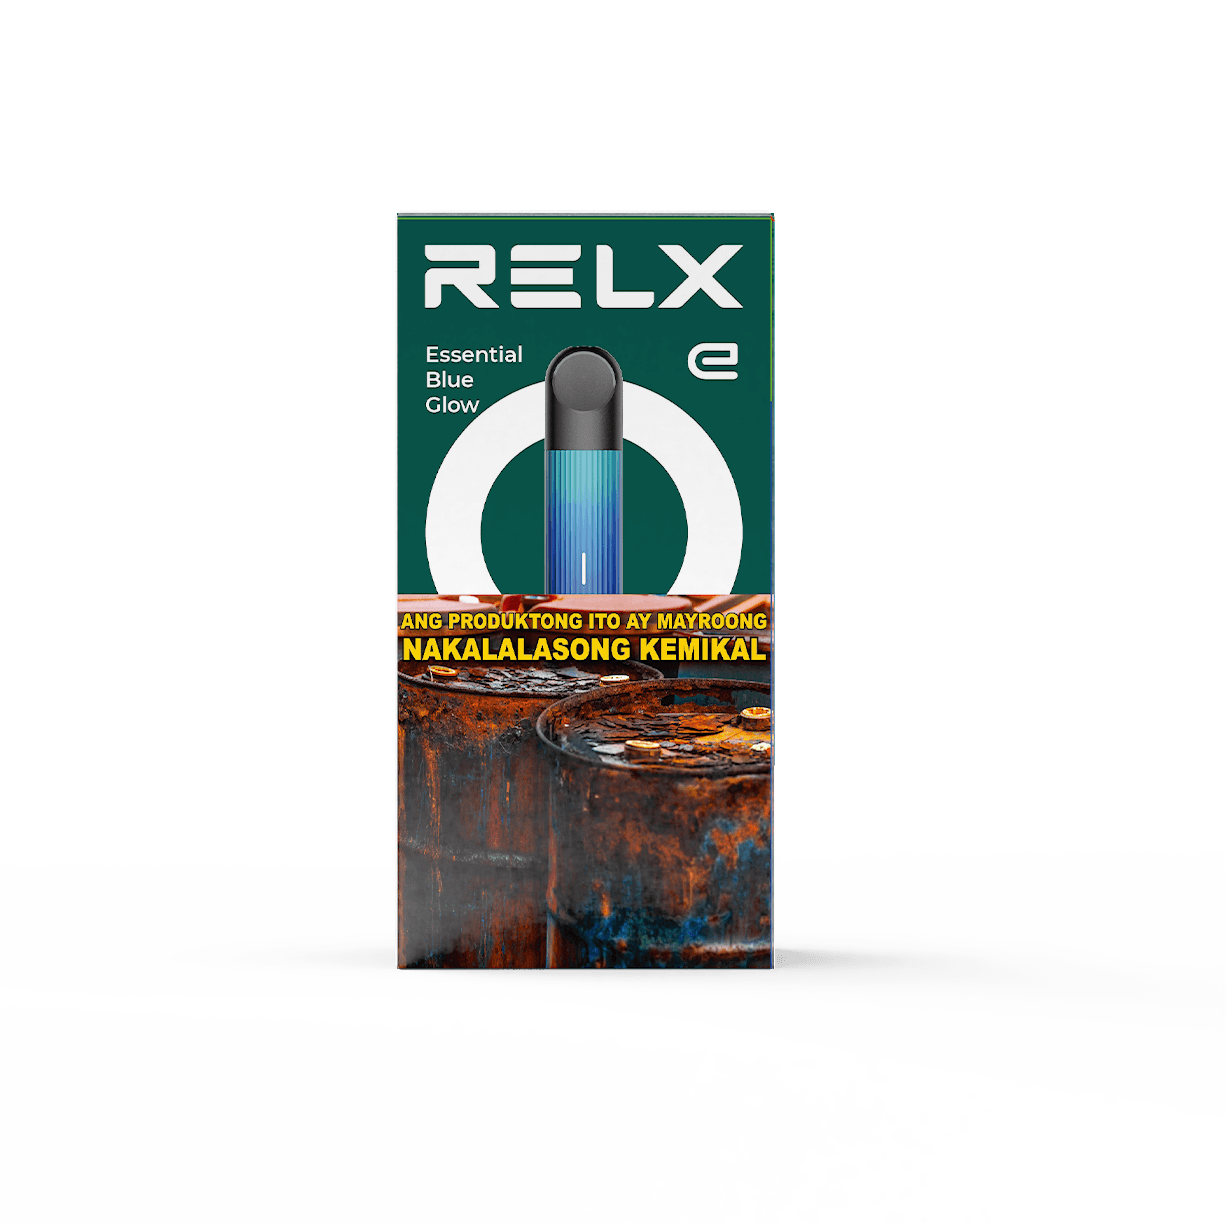 Relx Essential Device - Blue Glow at ₱899.00